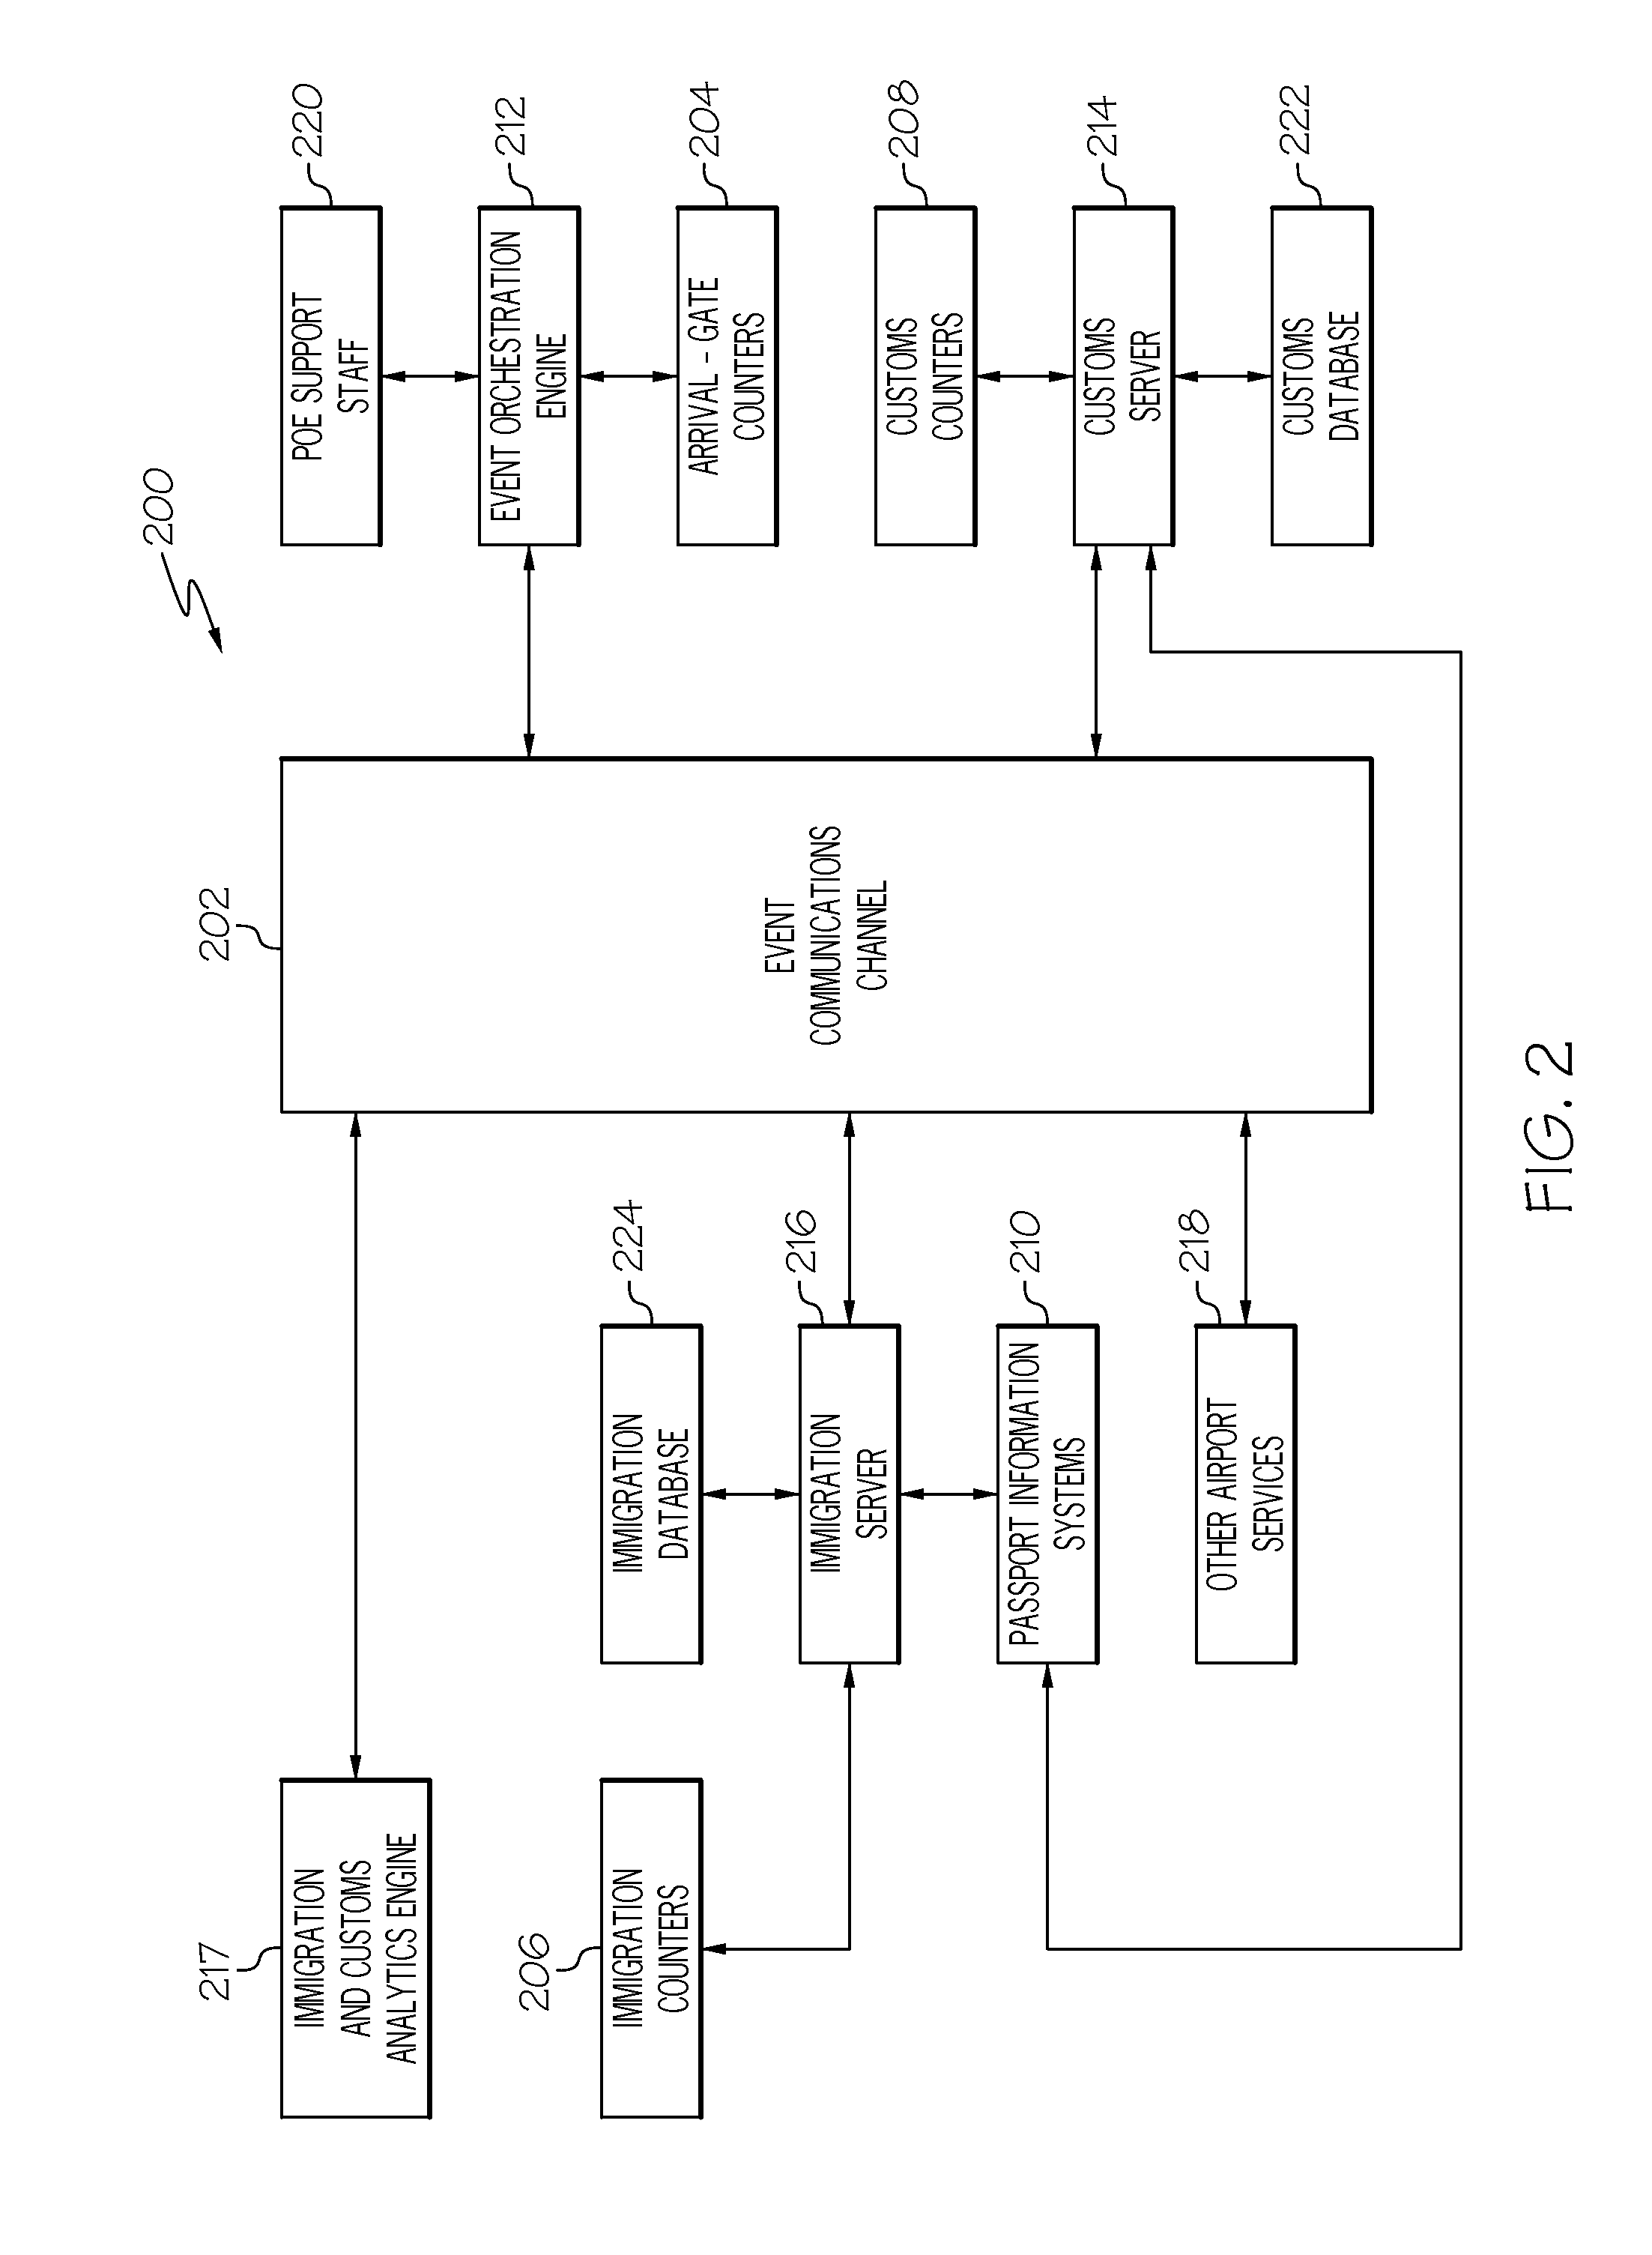 System and method for providing airport security